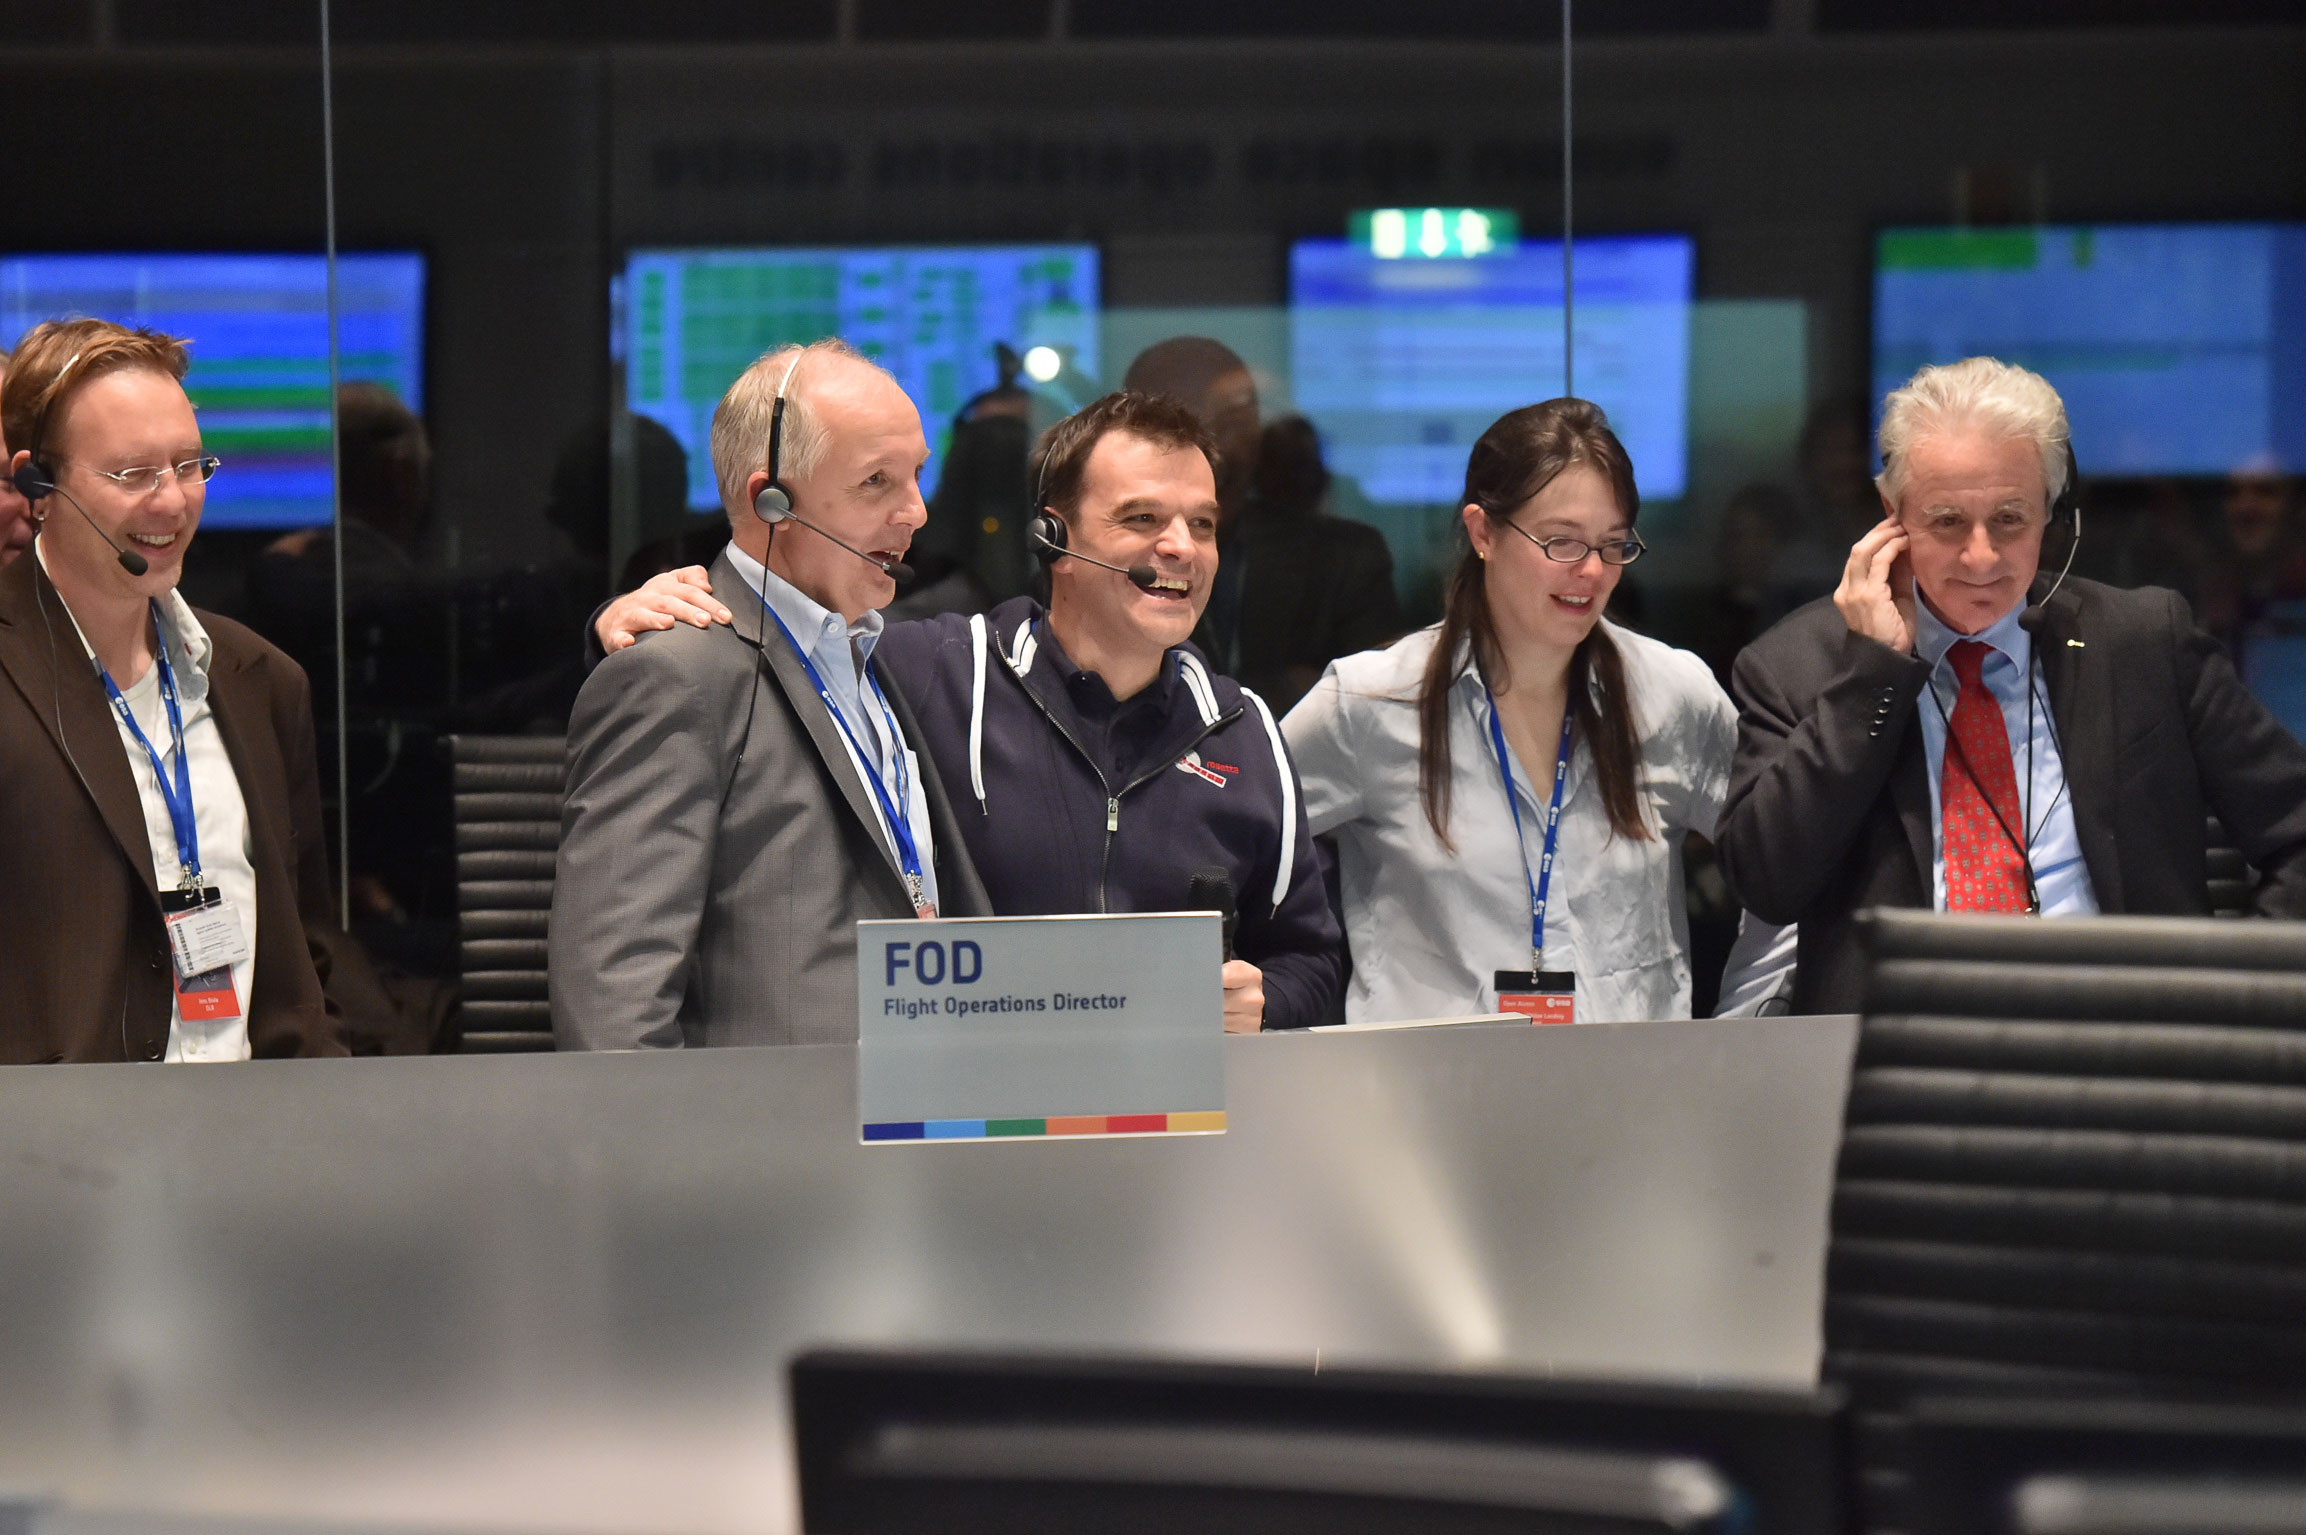 The Rosetta mission crew celebrate Philae successfully landing on comet 67P, at the European Operations Space Centre in Darmstadt, Germany on 12 November 2014. Credit: ESA/J.Mai